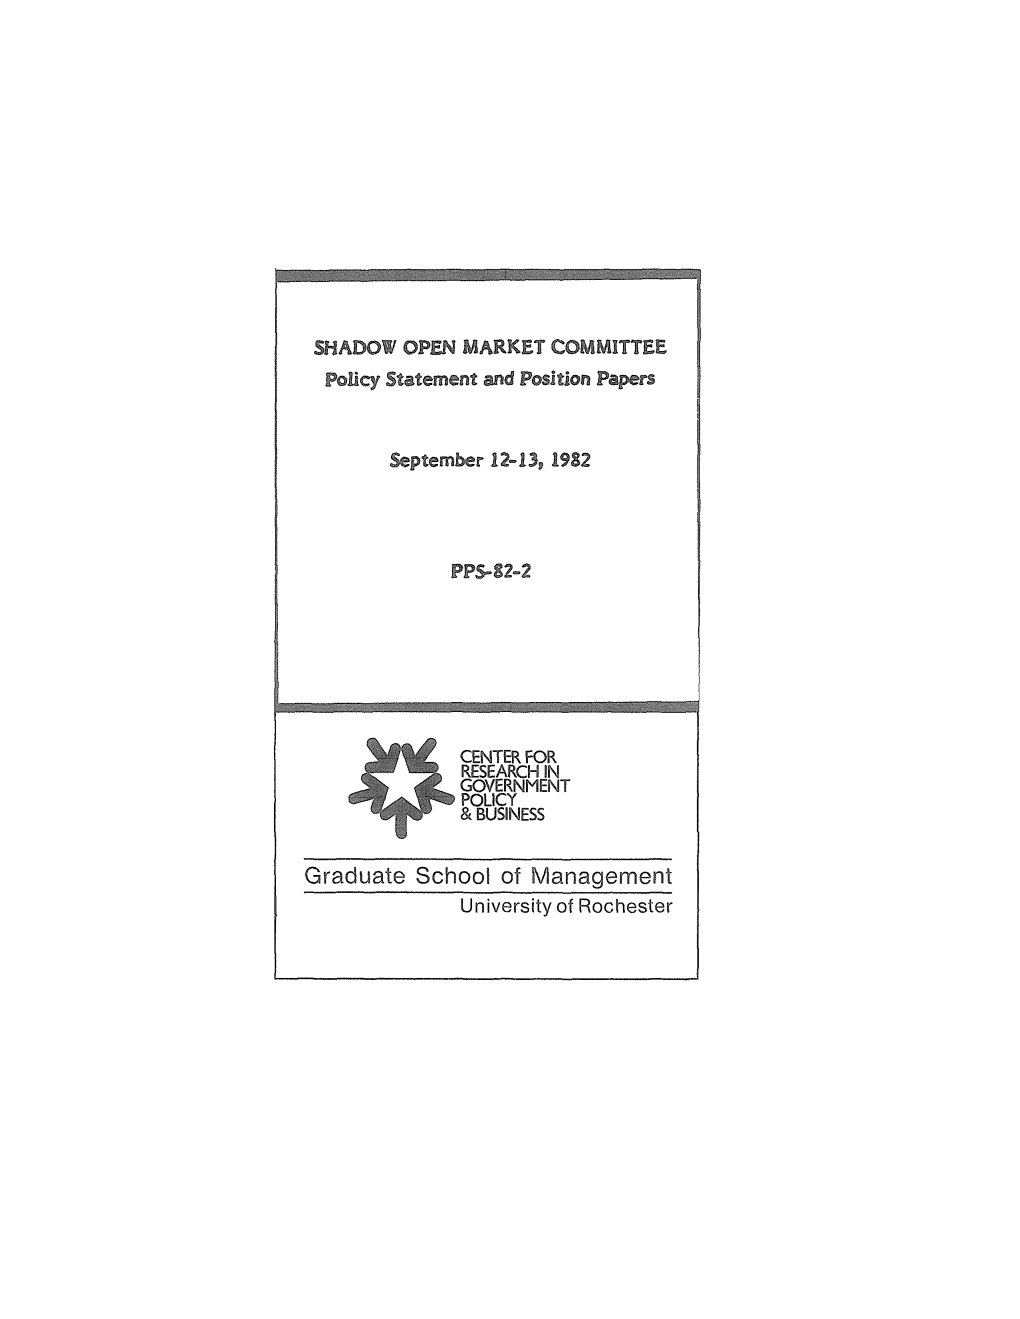 SHADOW OPEN MARKET COMMITTEE Policy Statement and Position Papers